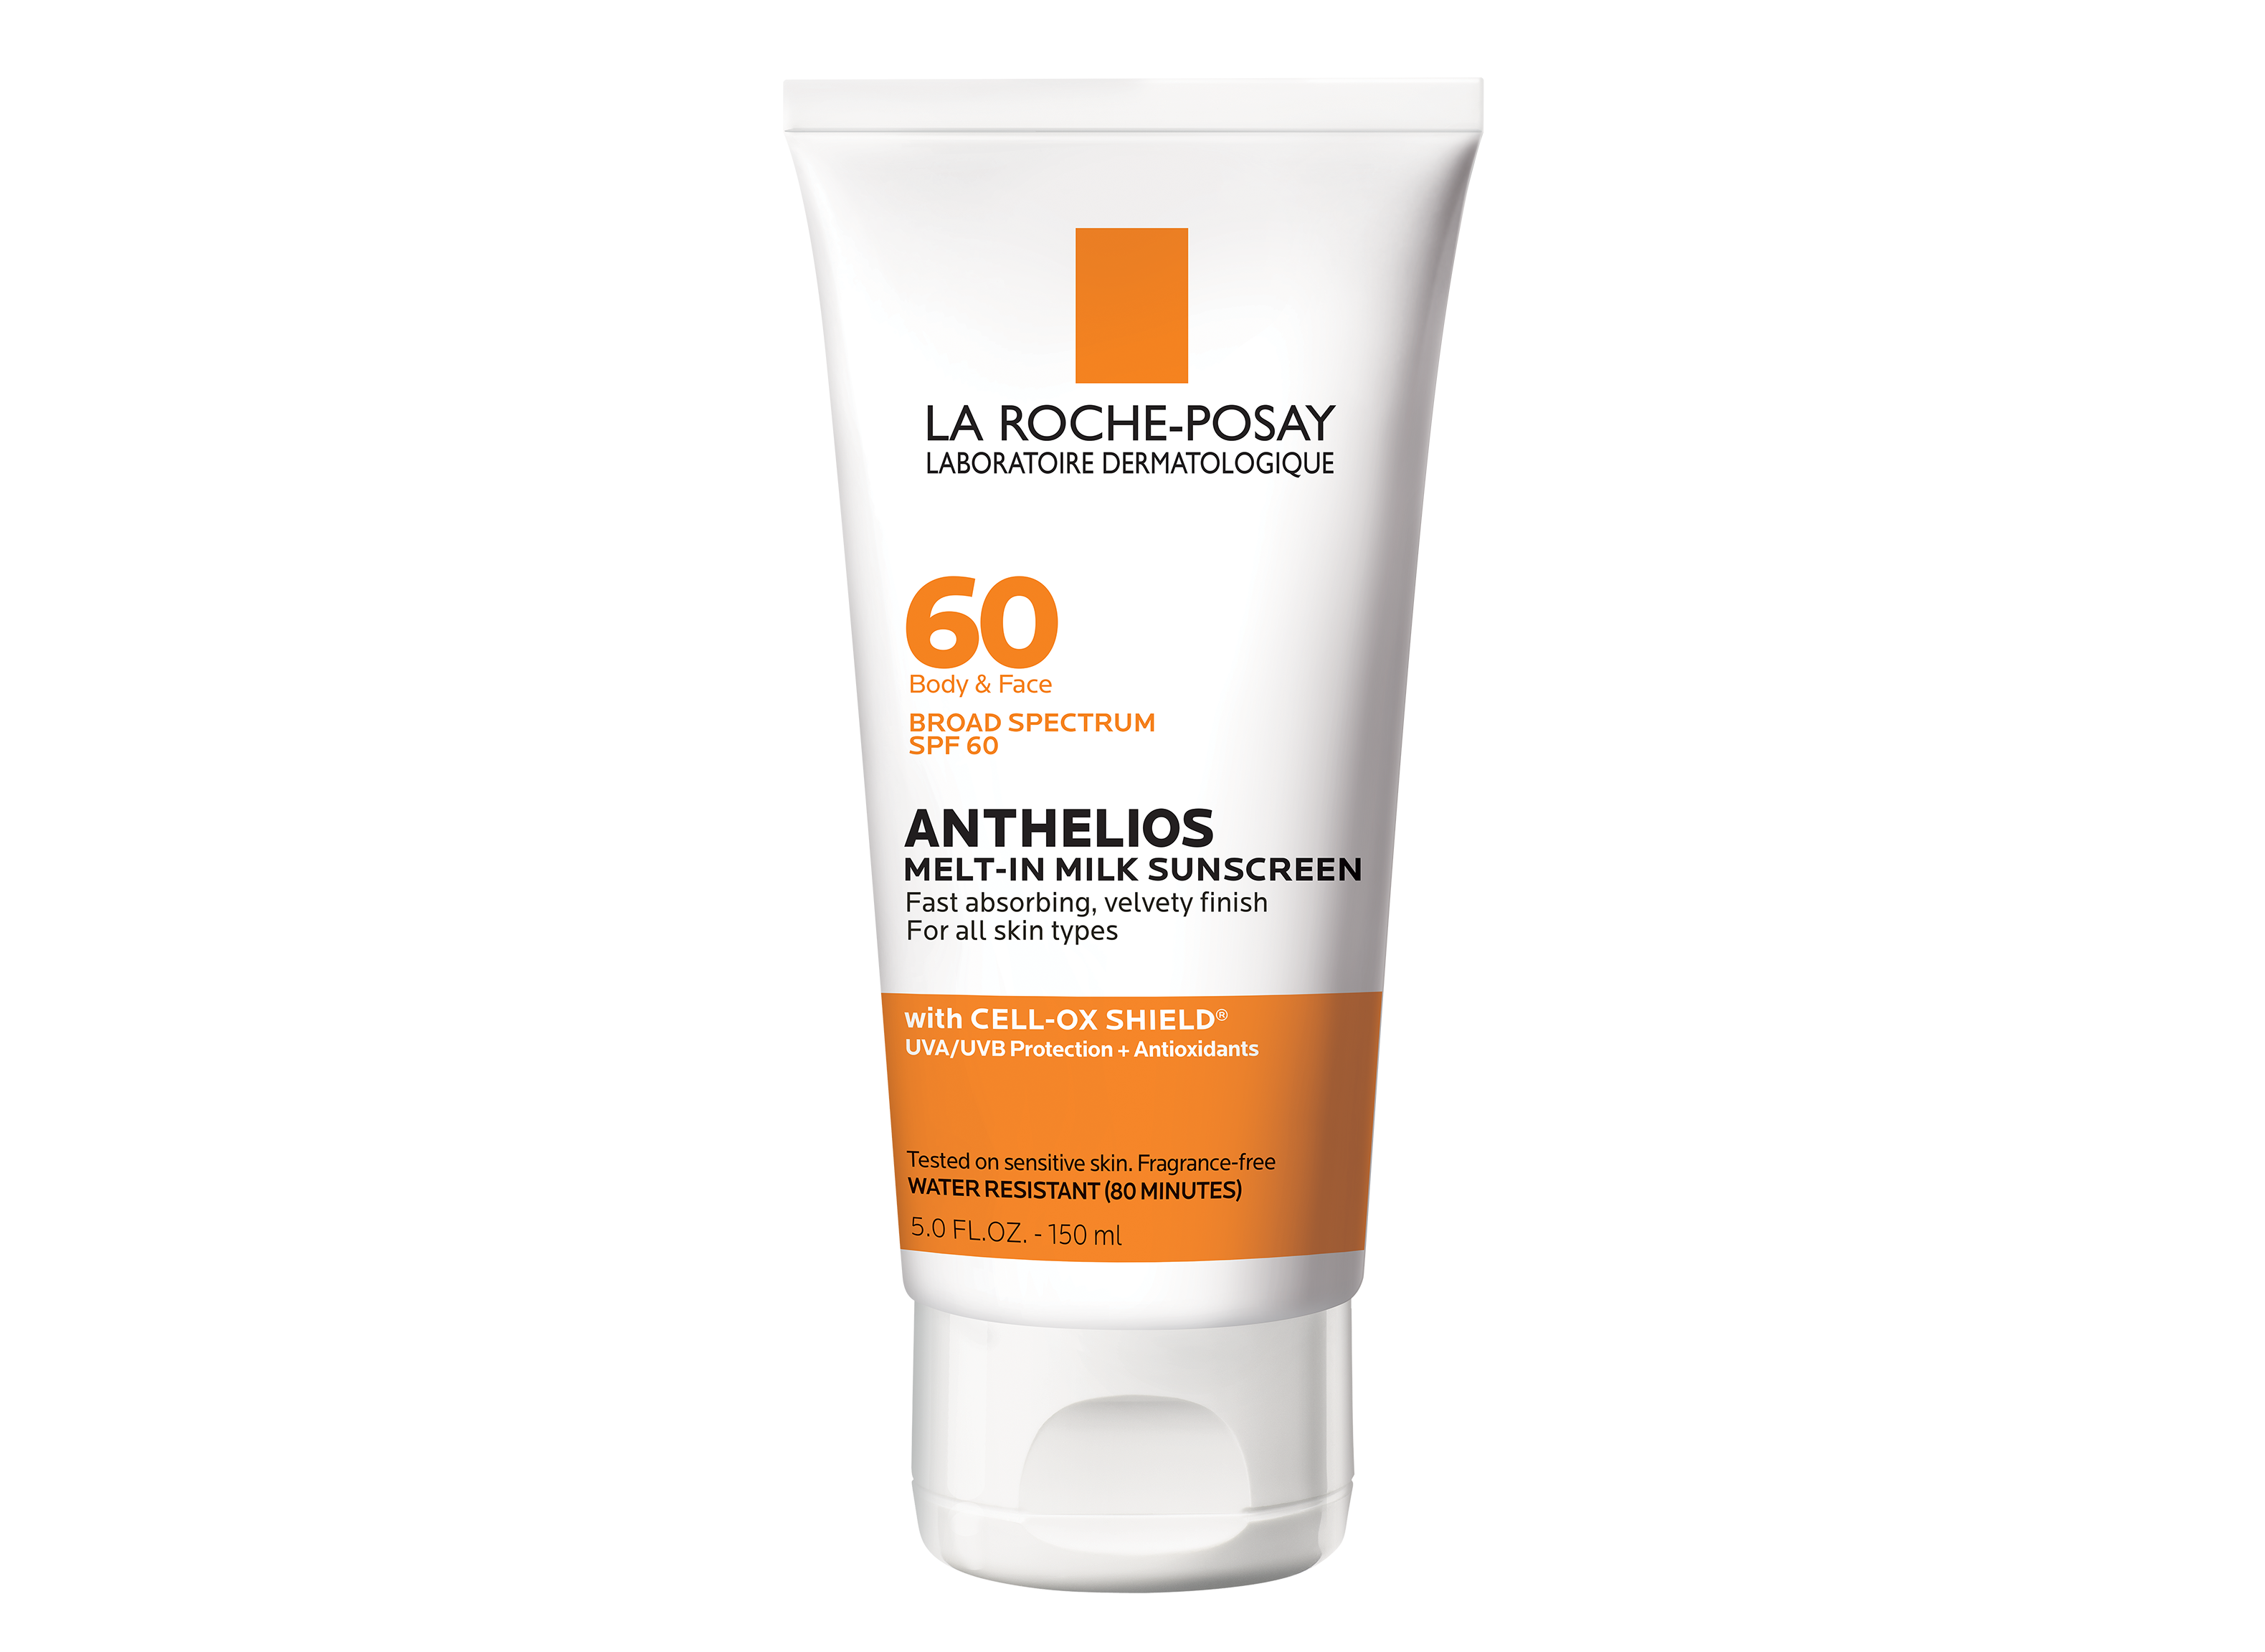 La Roche-Posay Anthelios Melt-In Milk Body & Face Sunscreen SPF 60, Oil  Free Sunscreen for Sensitive Skin, Sport Sunscreen Lotion, Sun Protection 